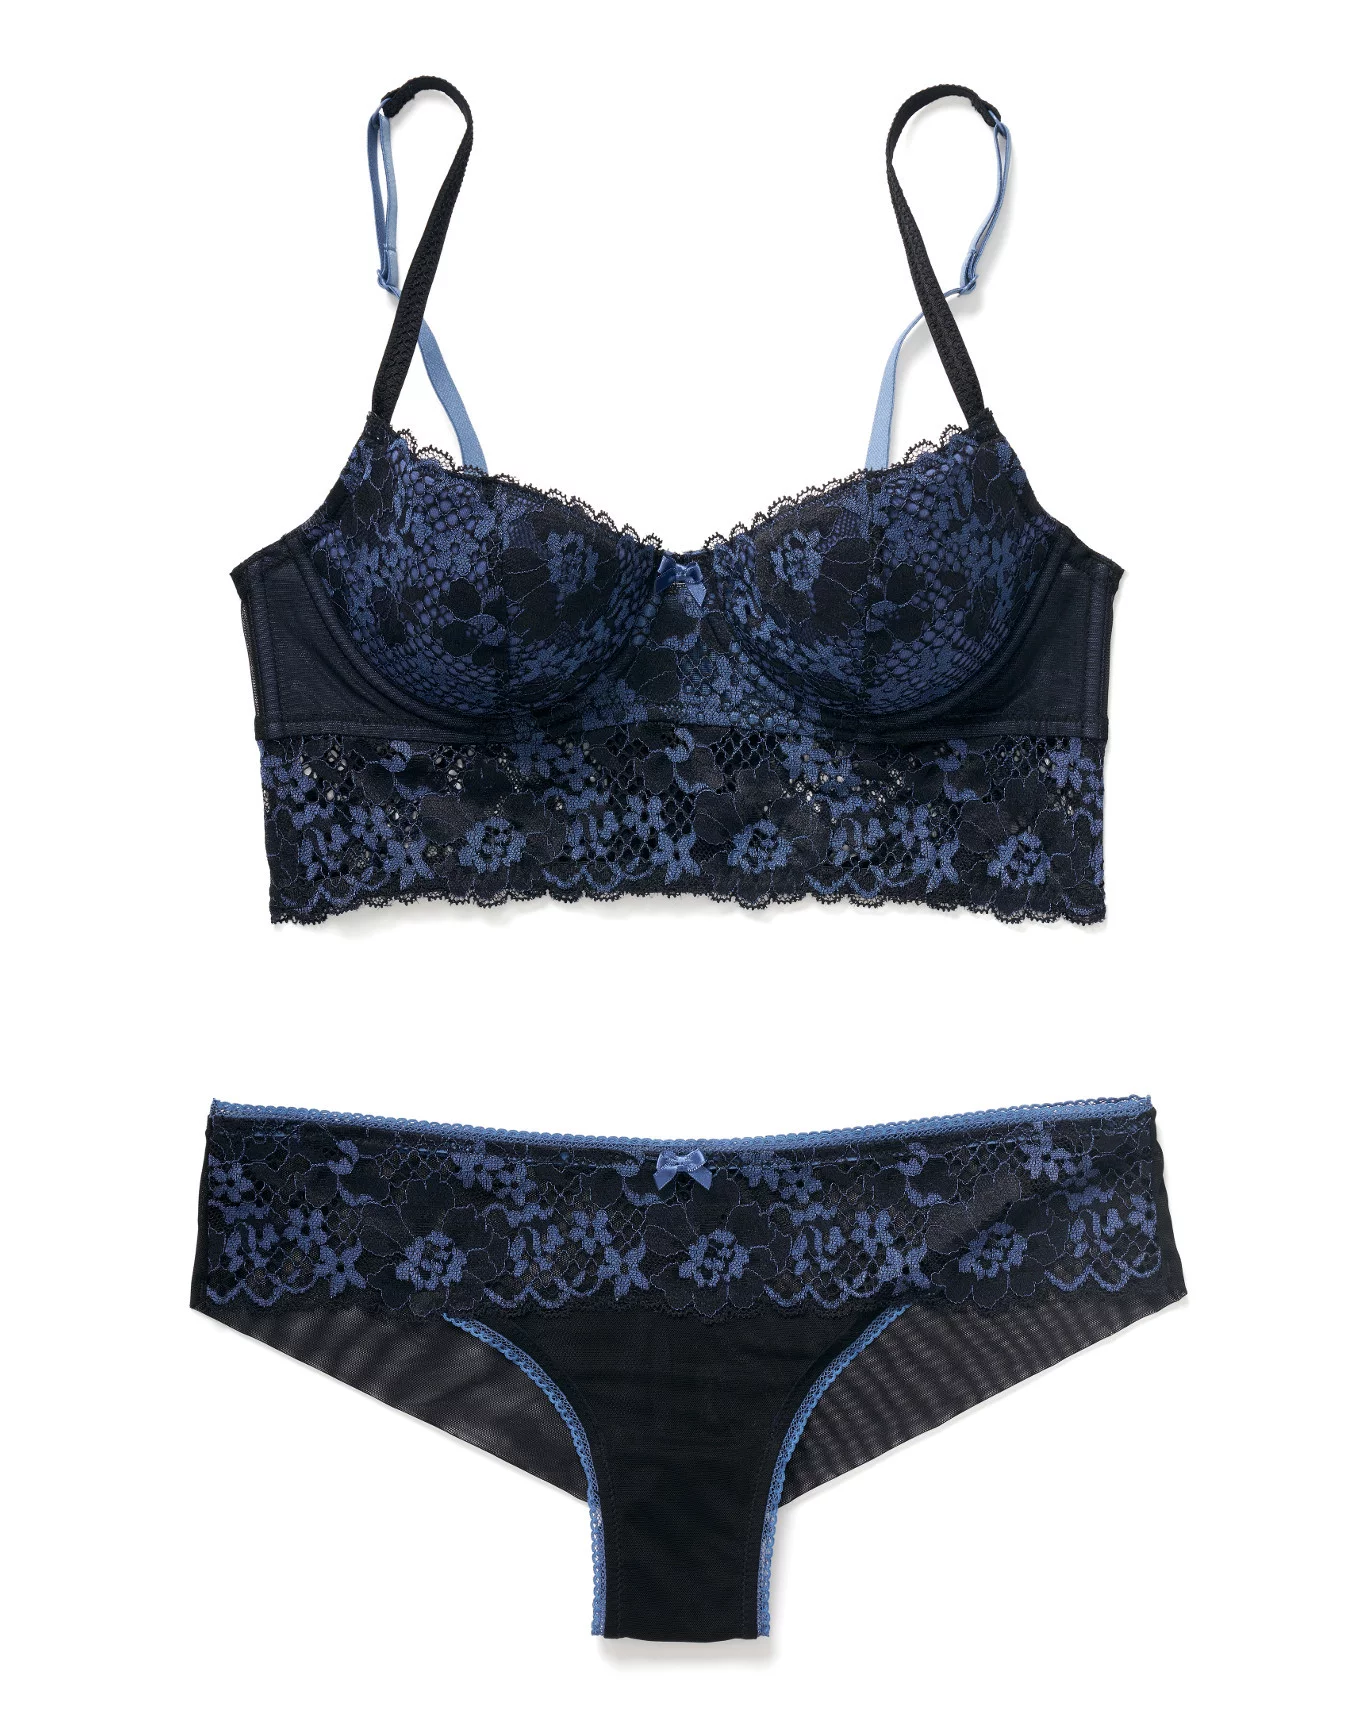 Buy online Black Cotton Bra And Panty Set from lingerie for Women by Tace  for ₹233 at 74% off